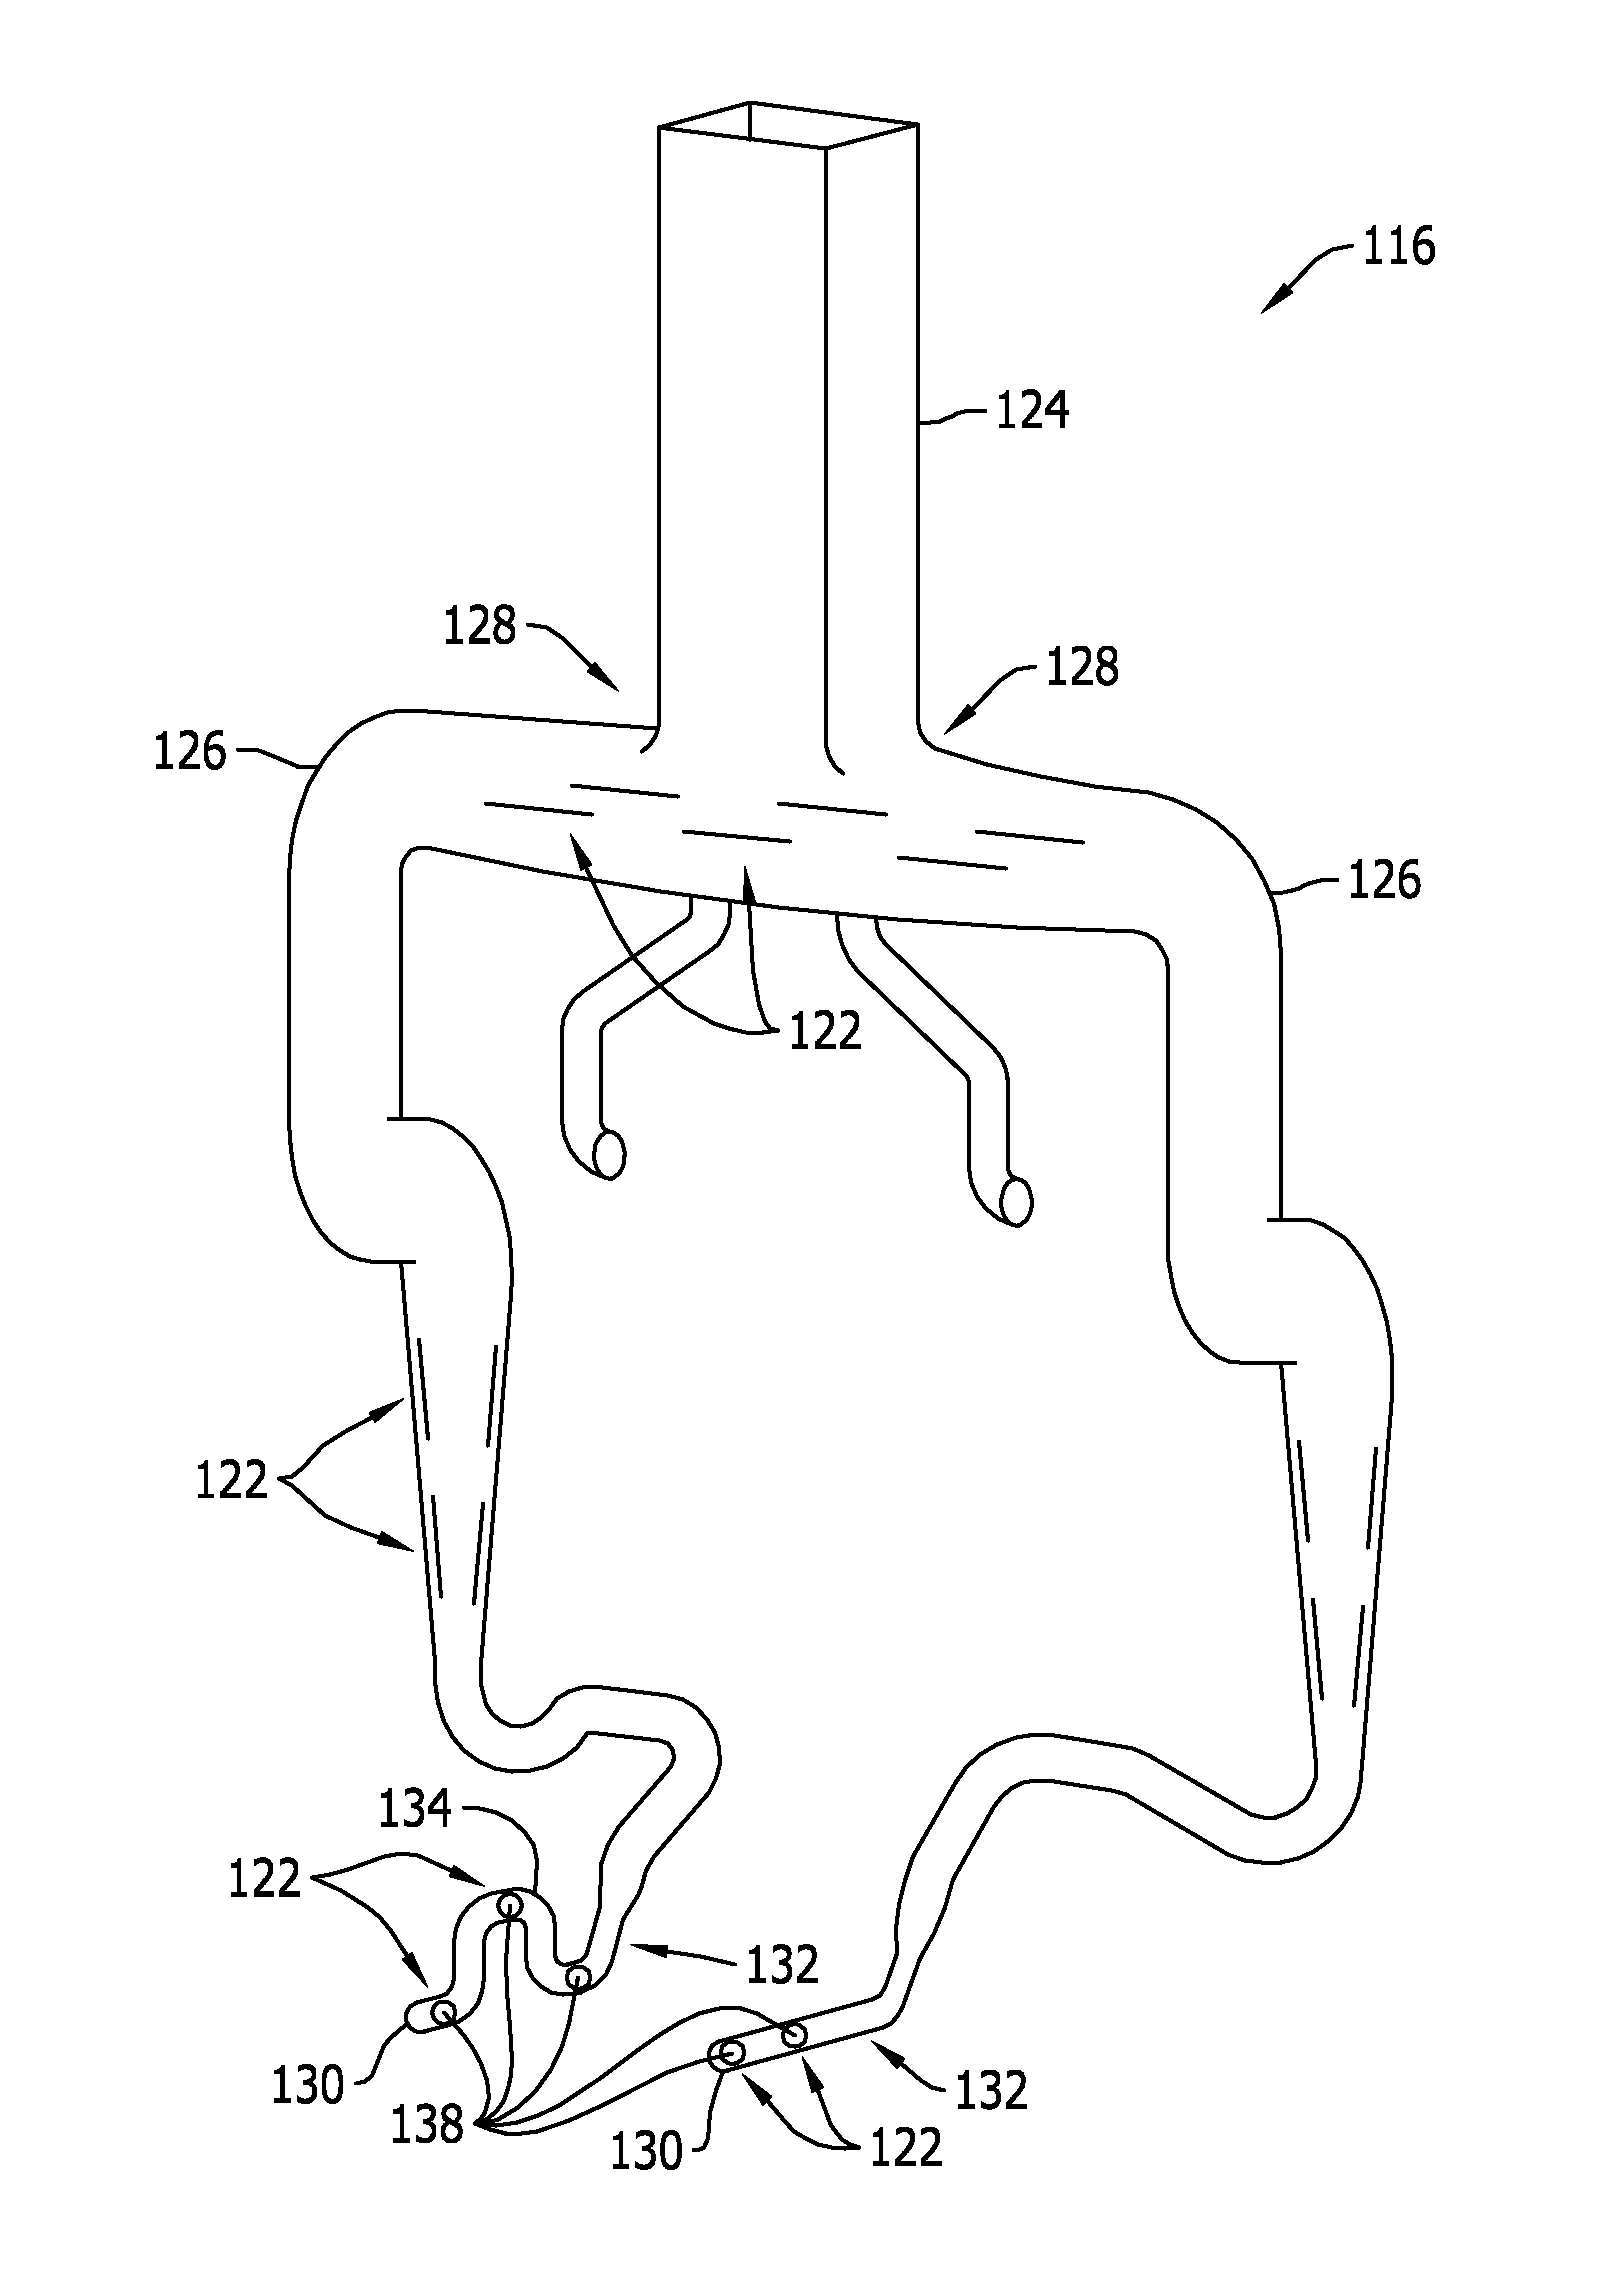 Fuel leak detection system for use in a turbine enclosure